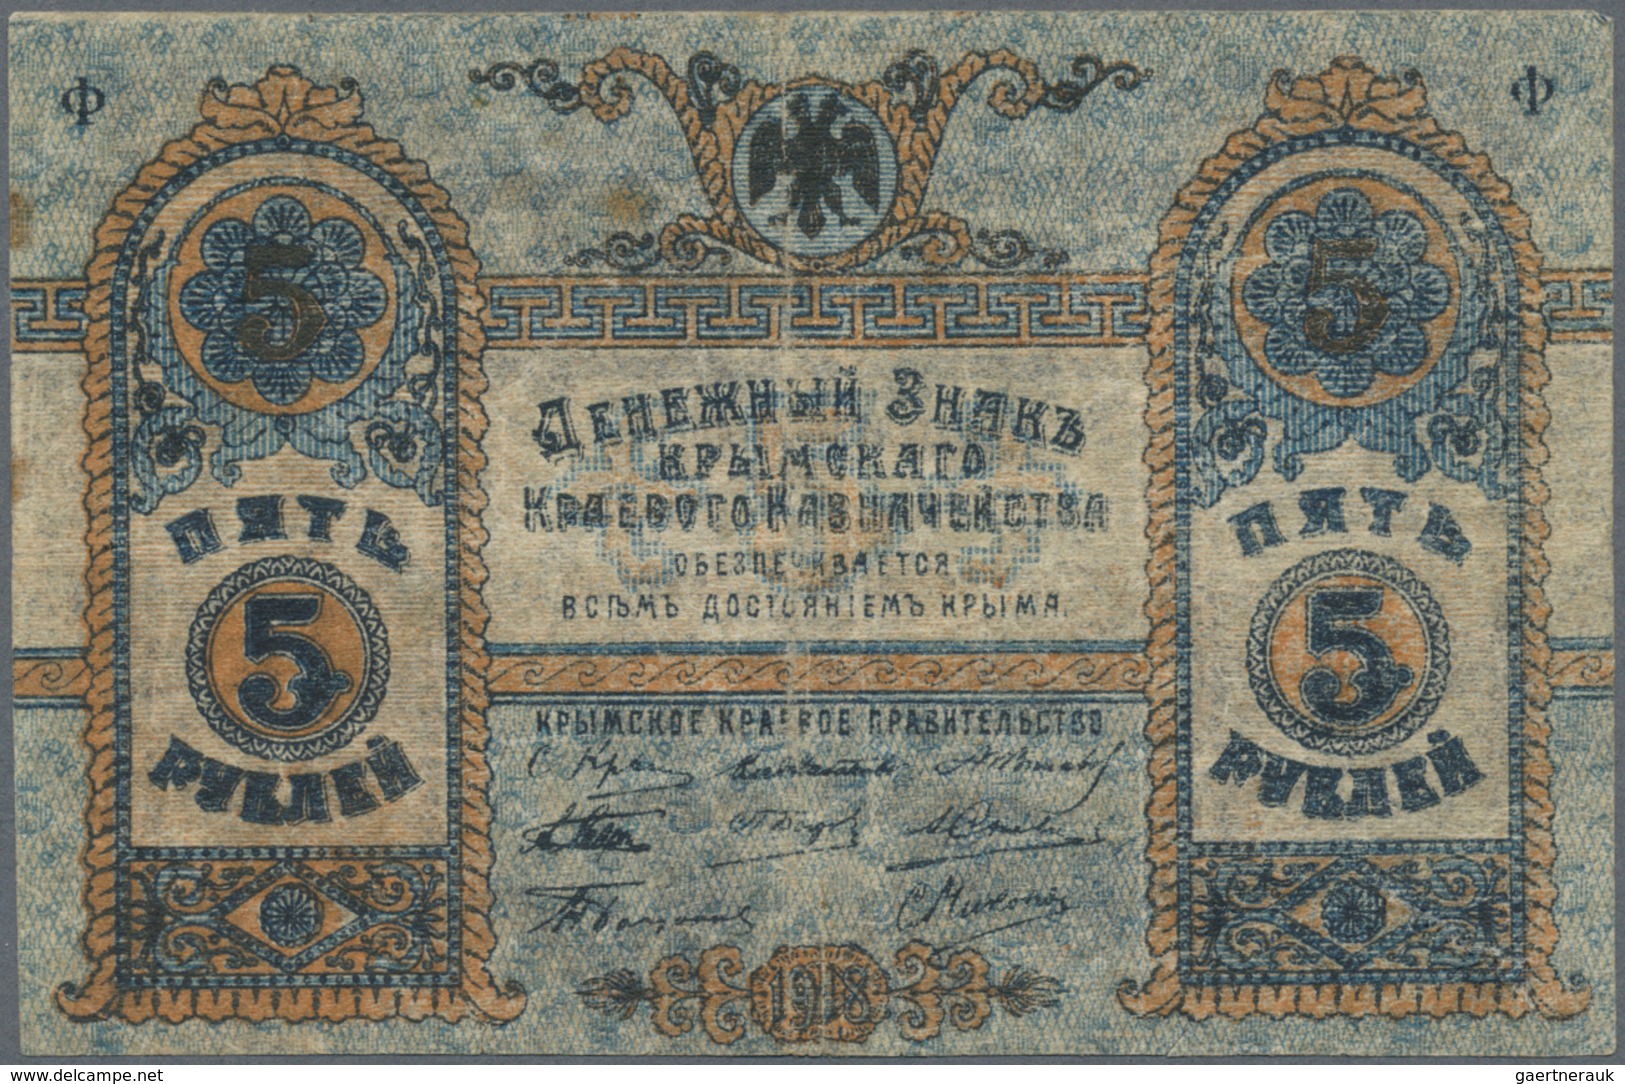 Ukraina / Ukraine: 5 Rubles 1919 P. S370, Used With Folds And A Small Holes, Still Nice Colors, Cond - Ukraine